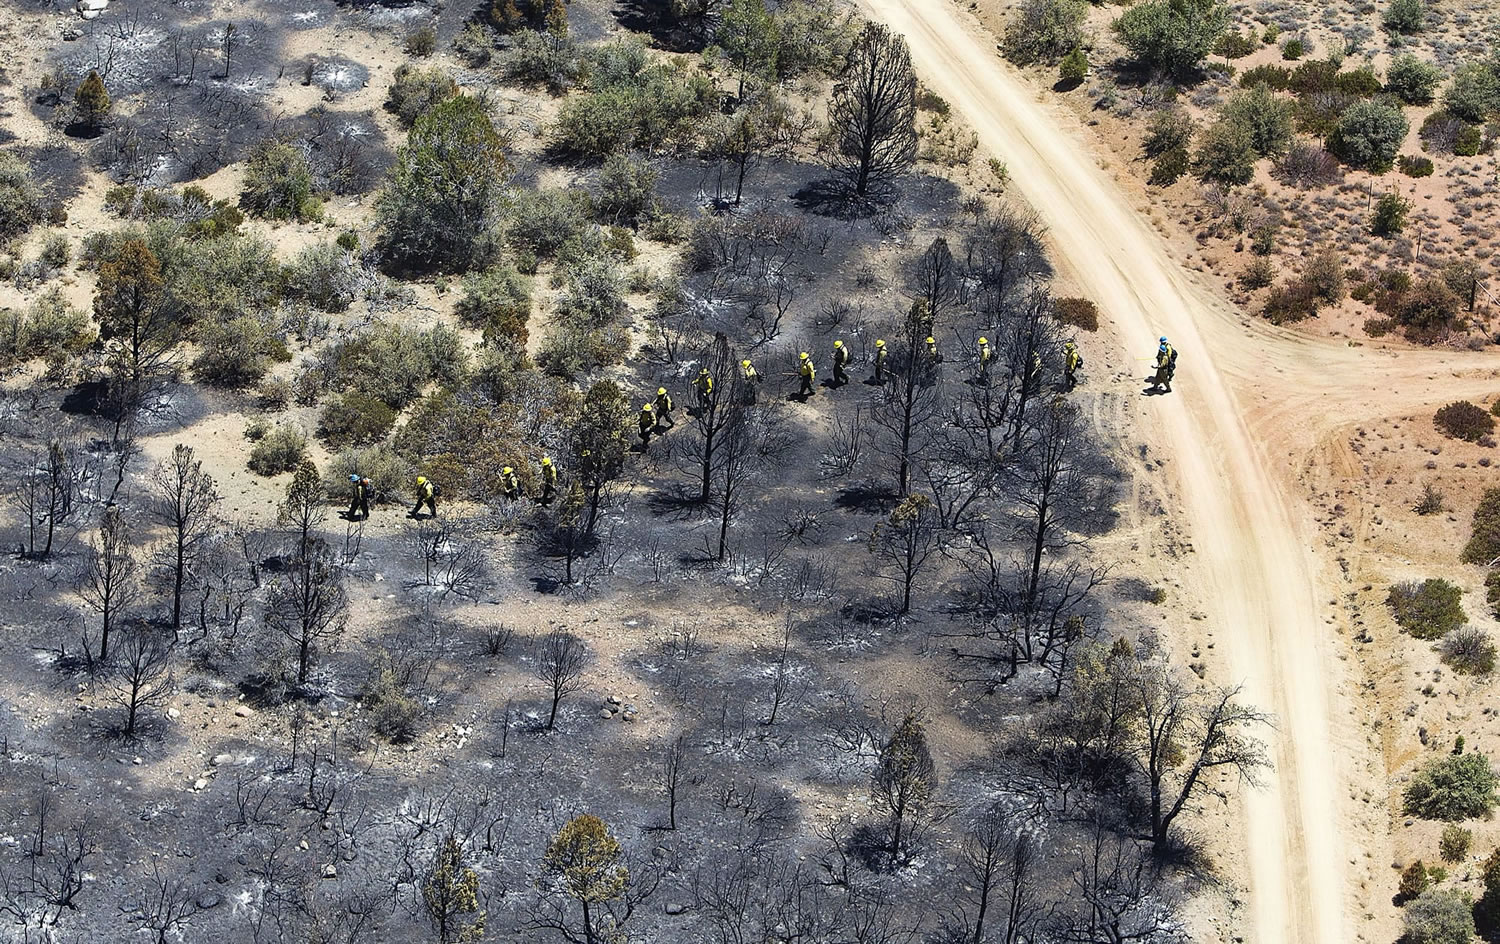 Firefighters walk across scorched land in Yarnell, Ariz., on Wednesday in the aftermath of the Yarnell Hill Fire that claimed the lives of 19 members of an elite firefighting crew on Sunday.